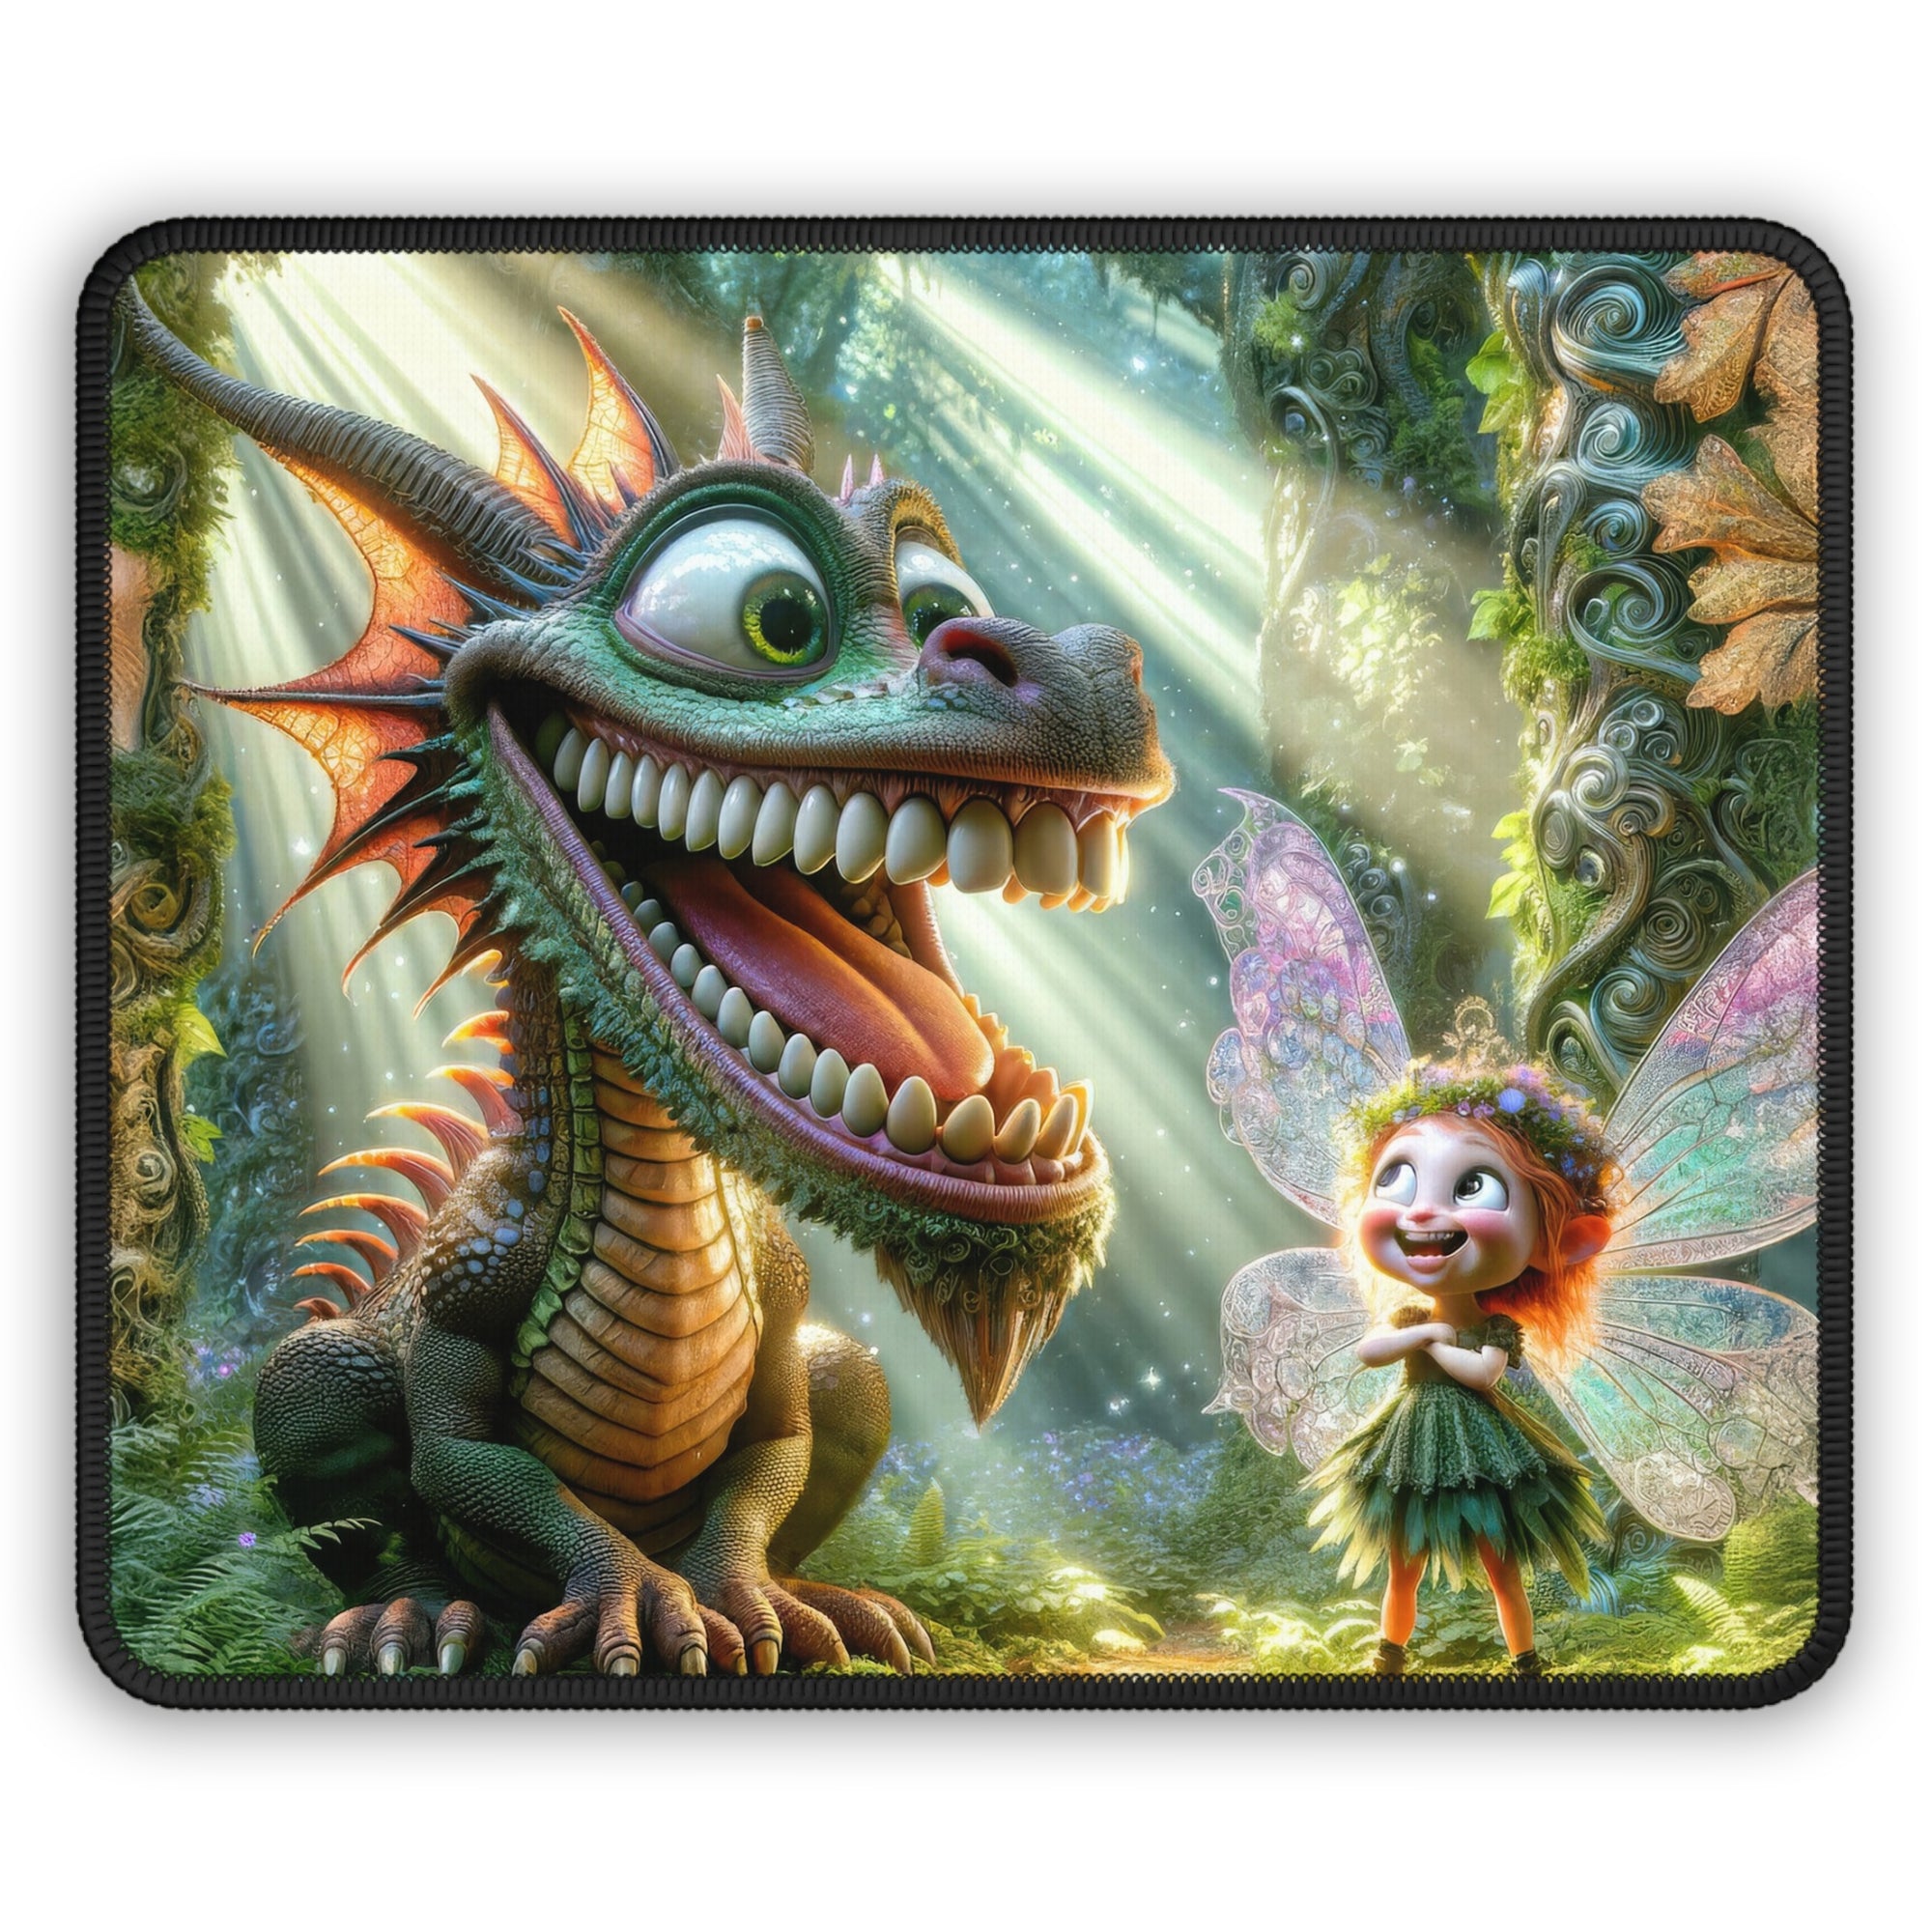 Gleaming Giggles in the Grove Mouse Pad